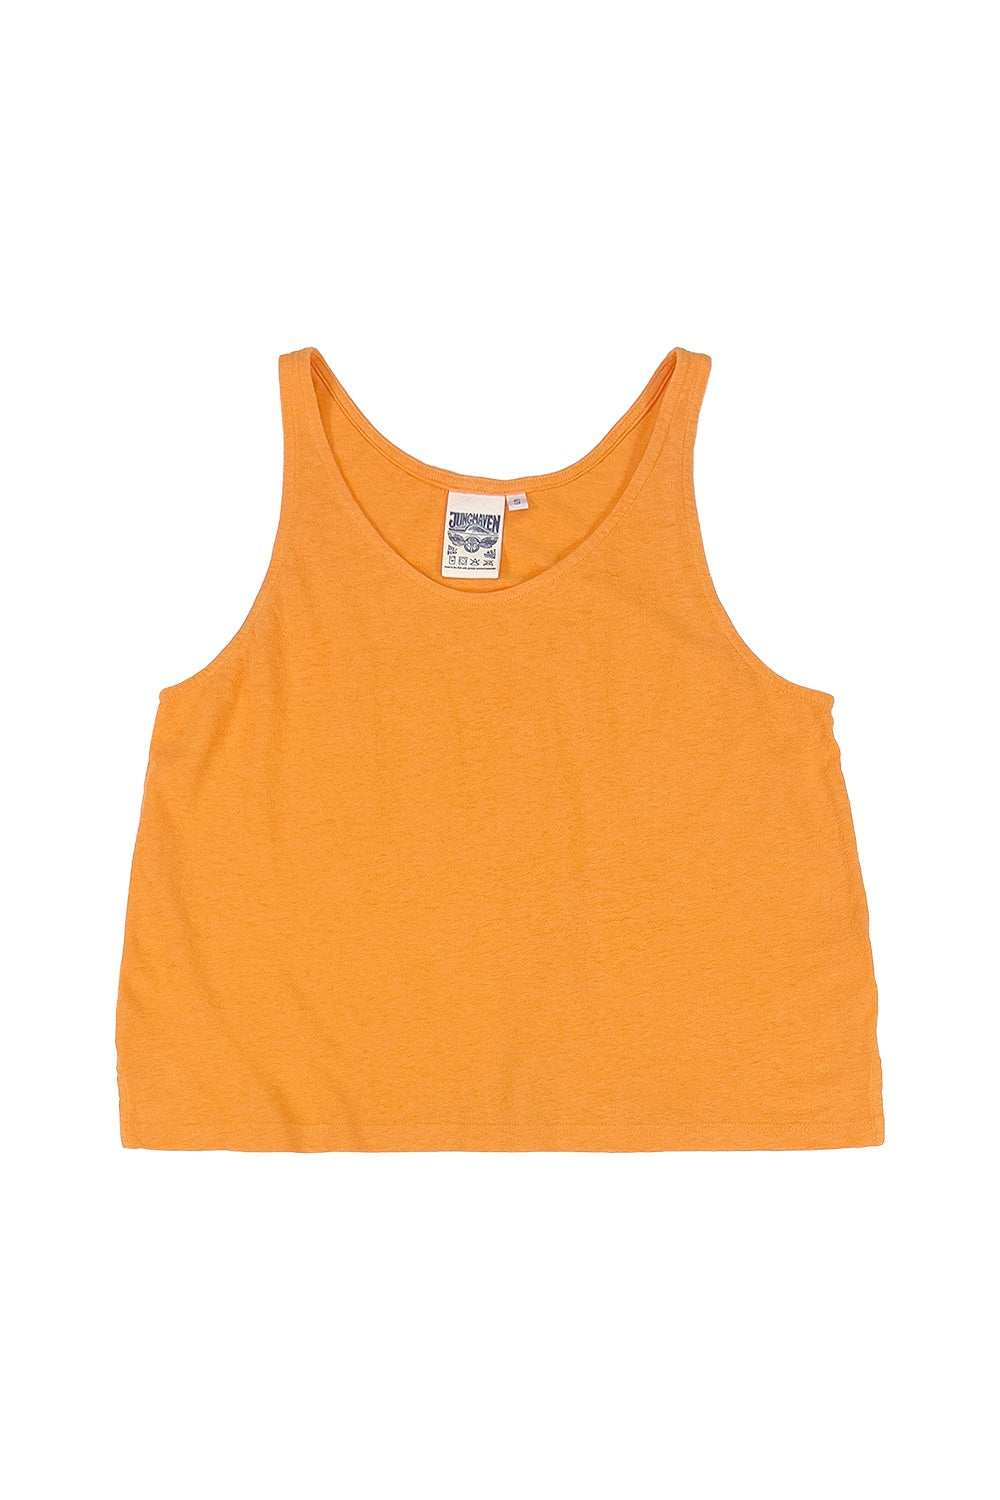 Cropped Tank | Jungmaven Hemp Clothing & Accessories / Color: Apricot Crush